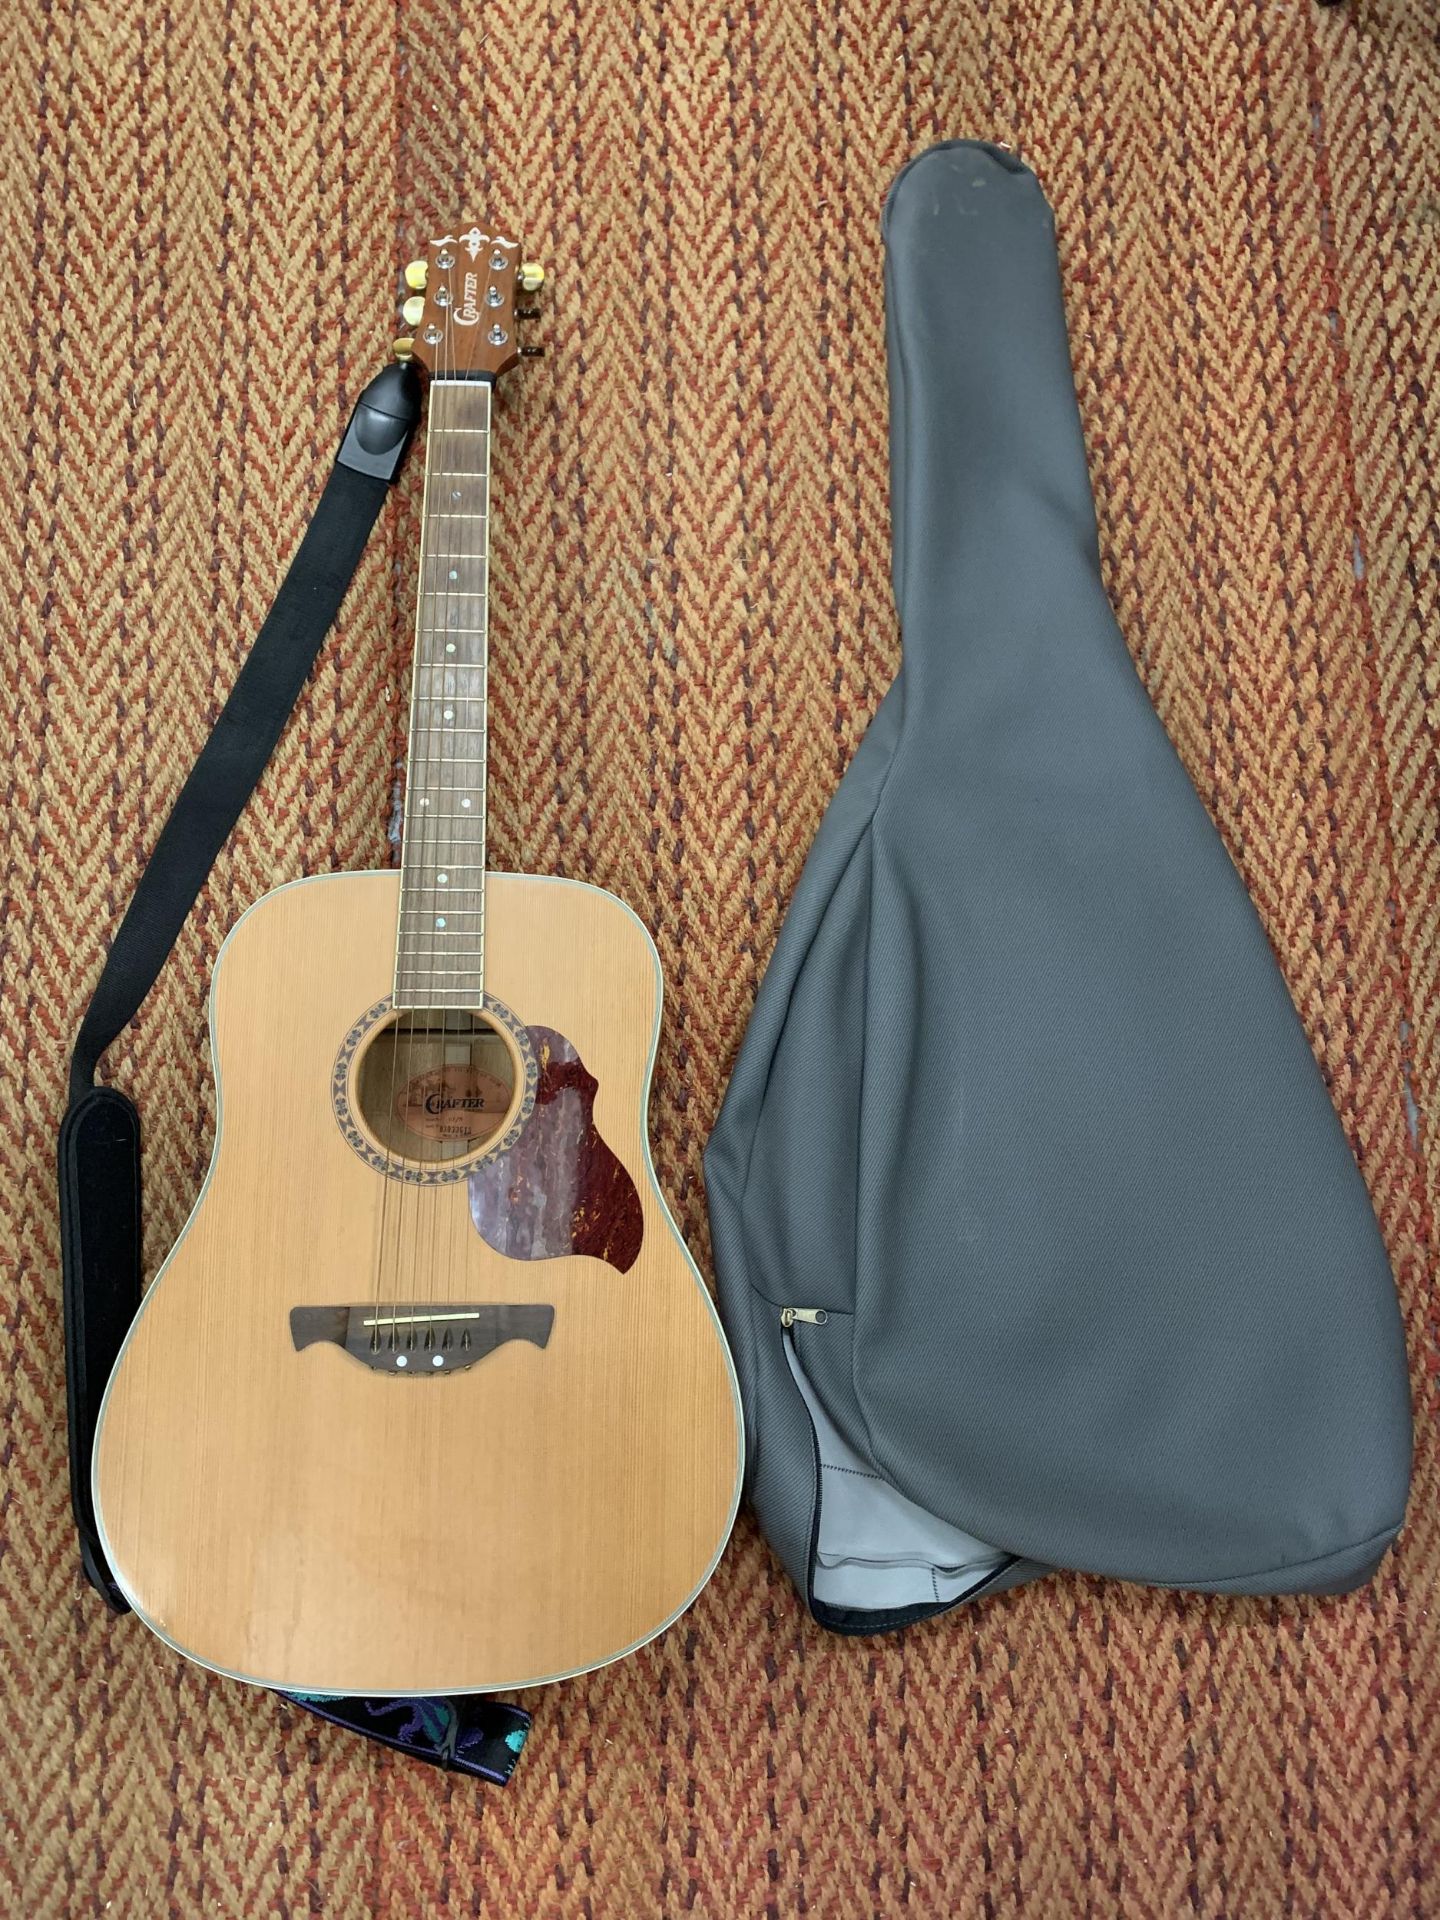 A CRAFTER ACOUSTIC GUITAR SERIAL NUMBER 03033613 WITH CARRY CASE